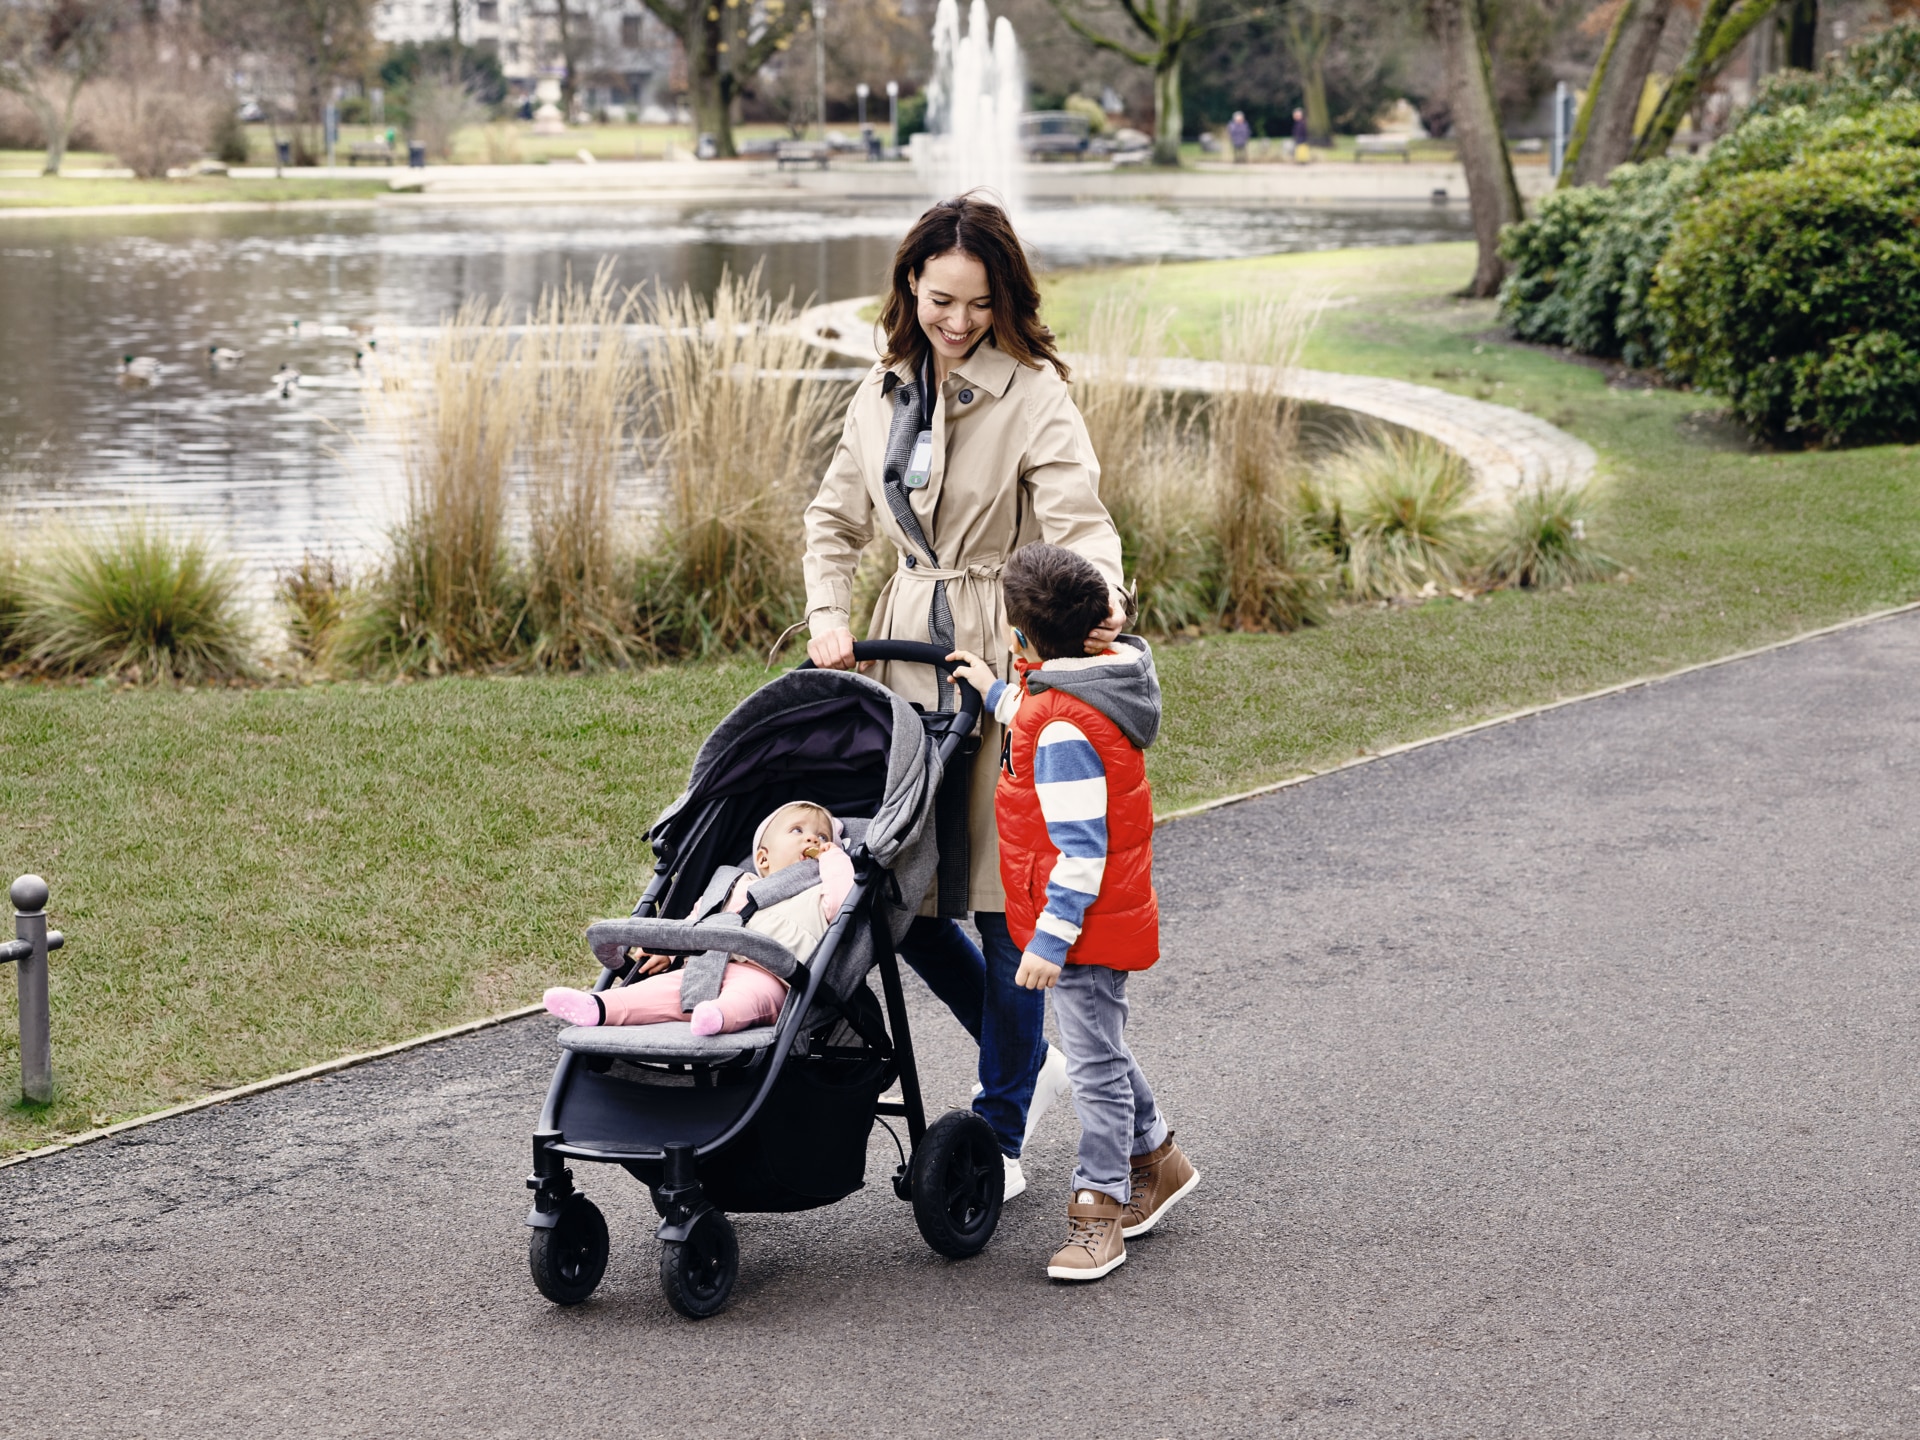 Young mother in a park with her two children - one of them is wearing a hearing aid.